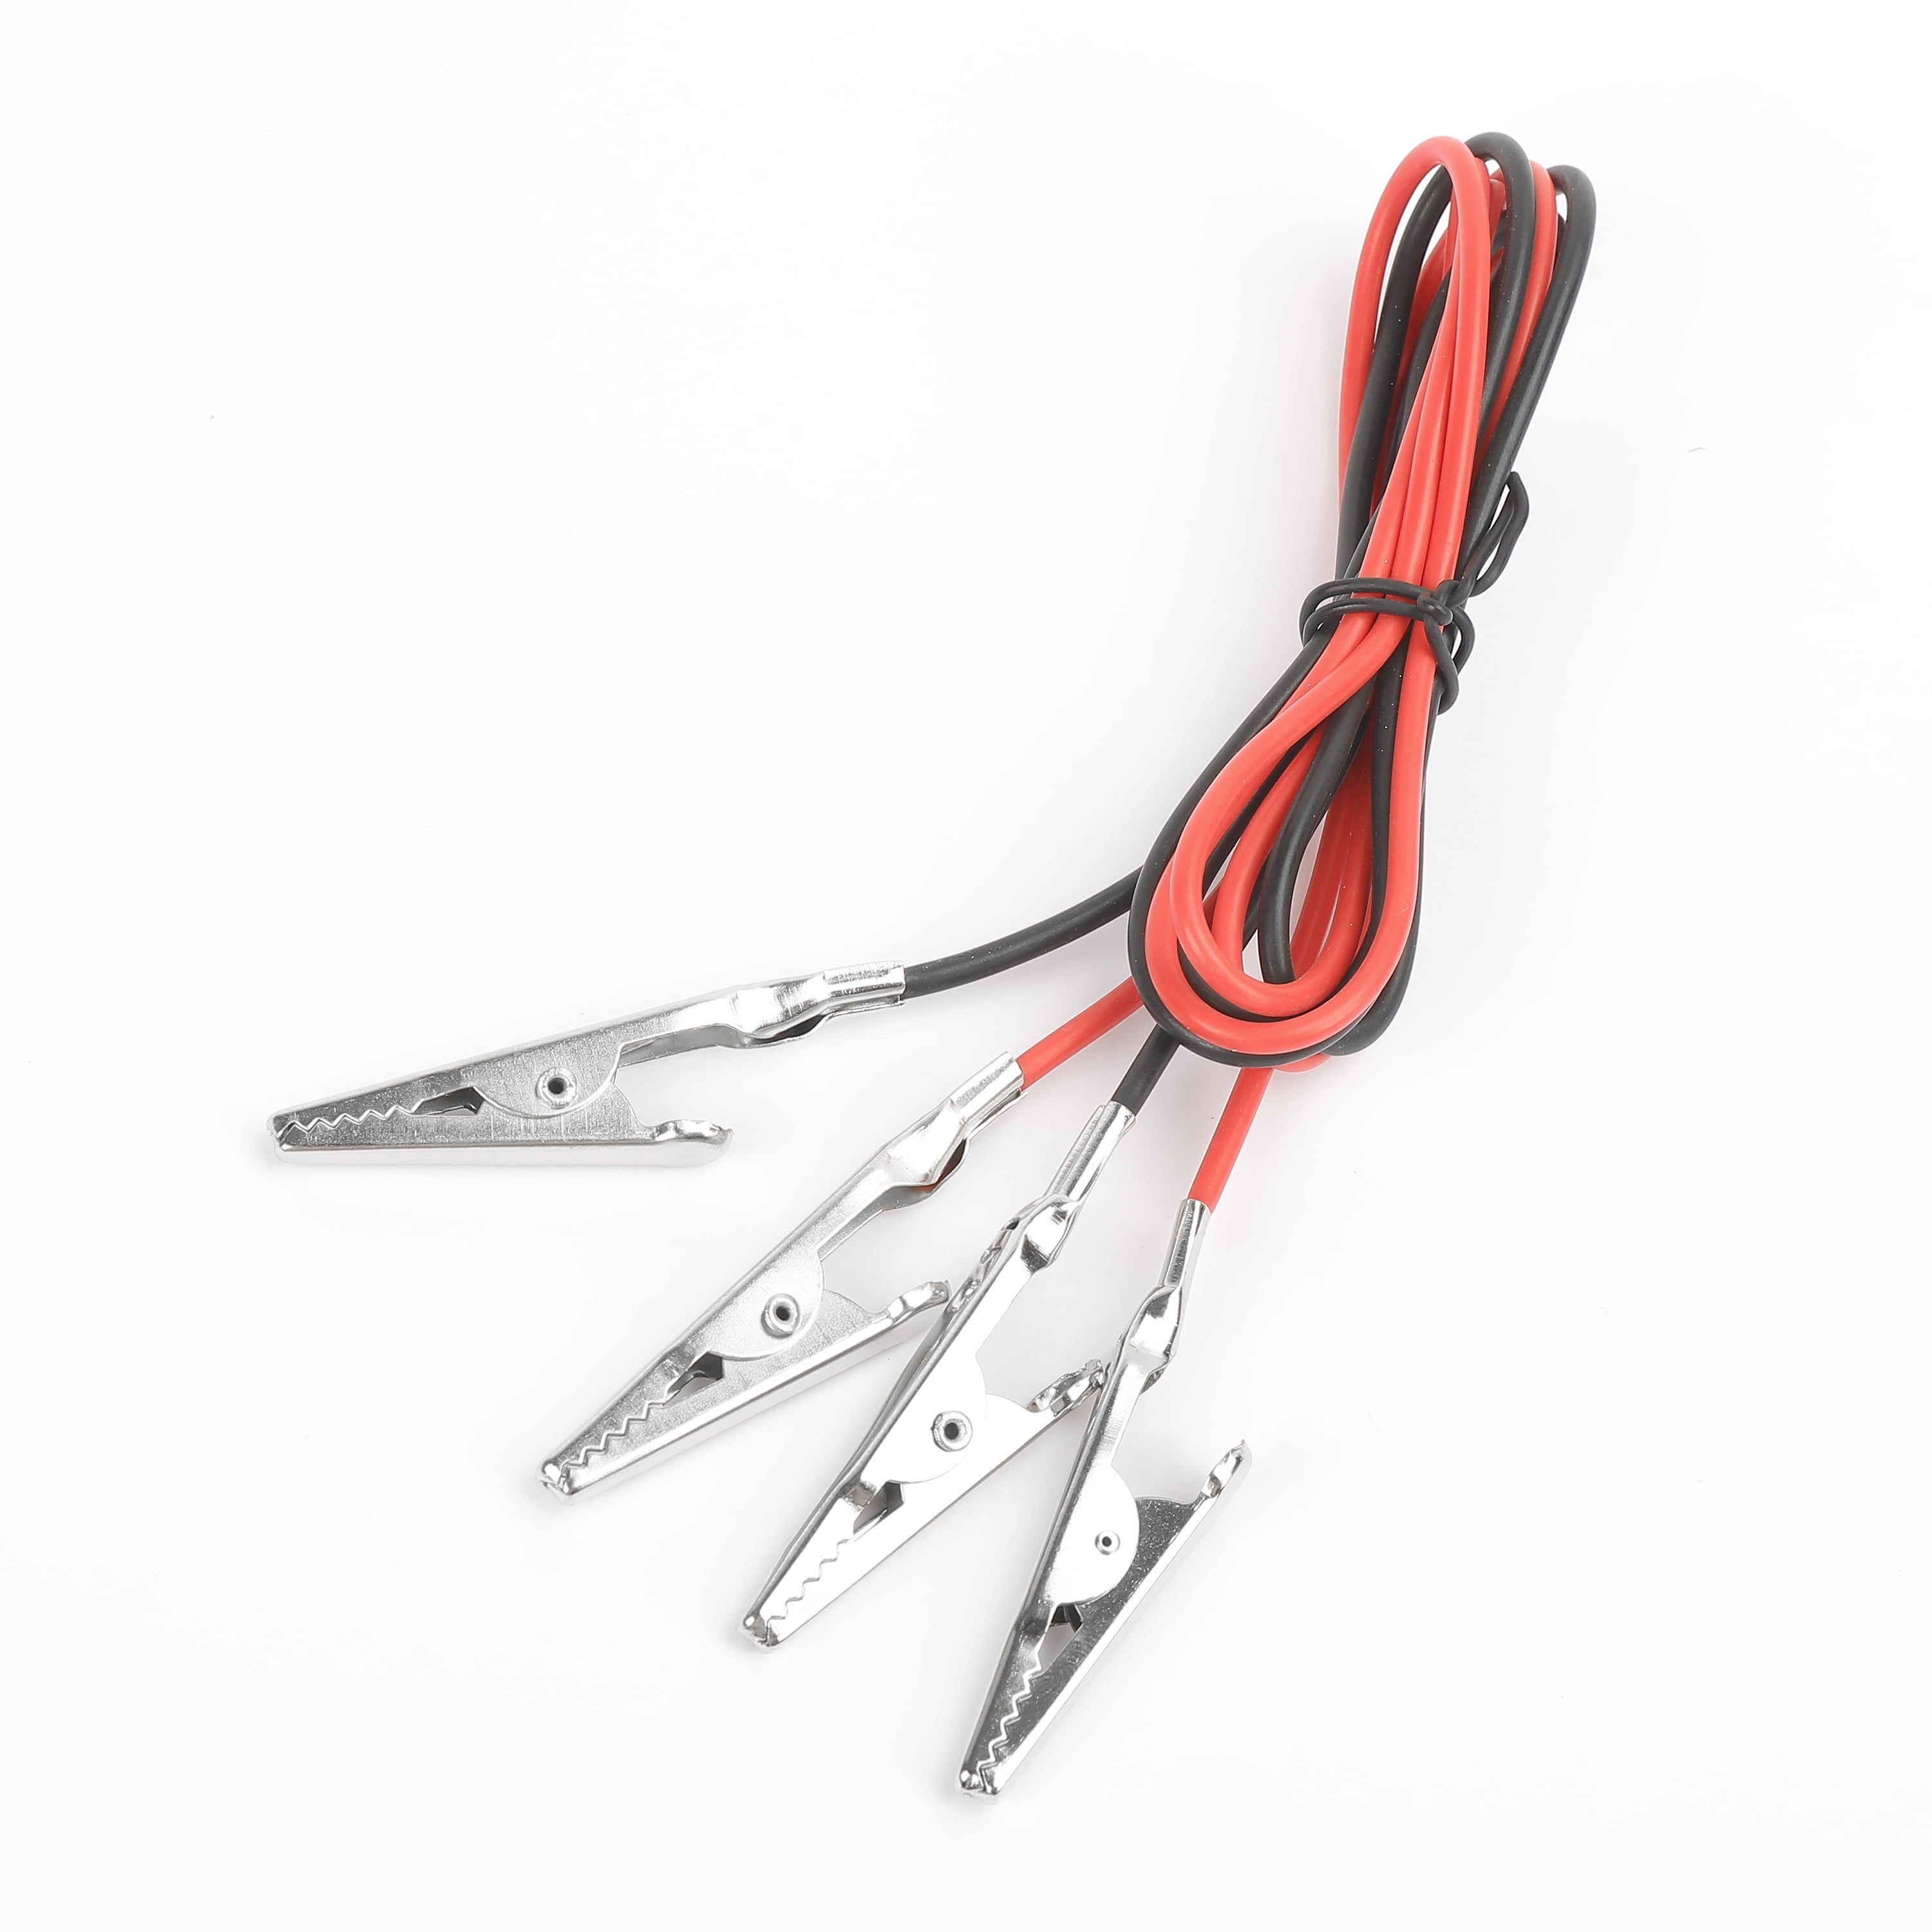 Ever Start 30-inch Test Lead Black & Red, Model 5130, 4 Alligator Clips, 2 Electrical Wires, 22AWG